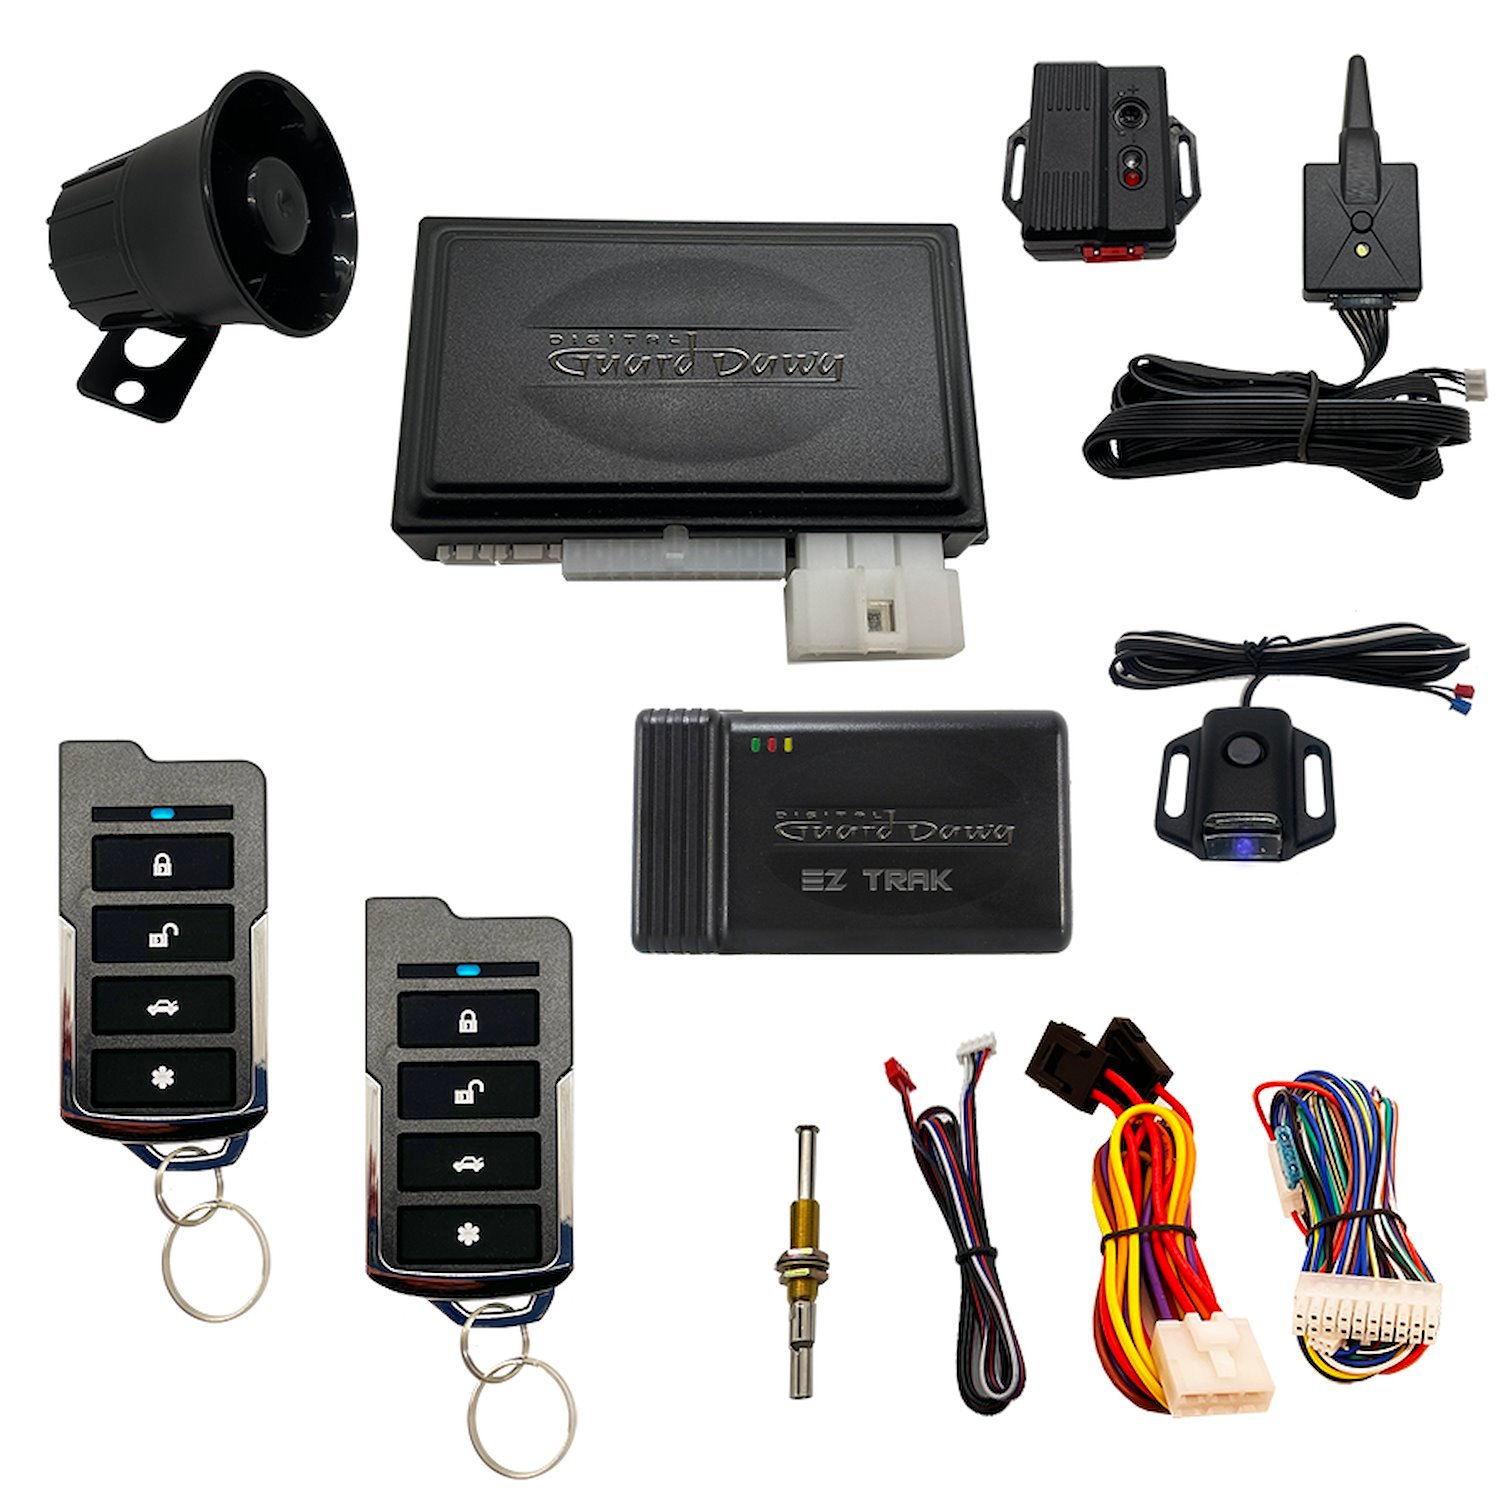 DGD-KY-ALM-RS1-EZ Keyless Entry, Alarm System, and Remote Start, 1-Way, w/ Smart Phone EZ-Tracking